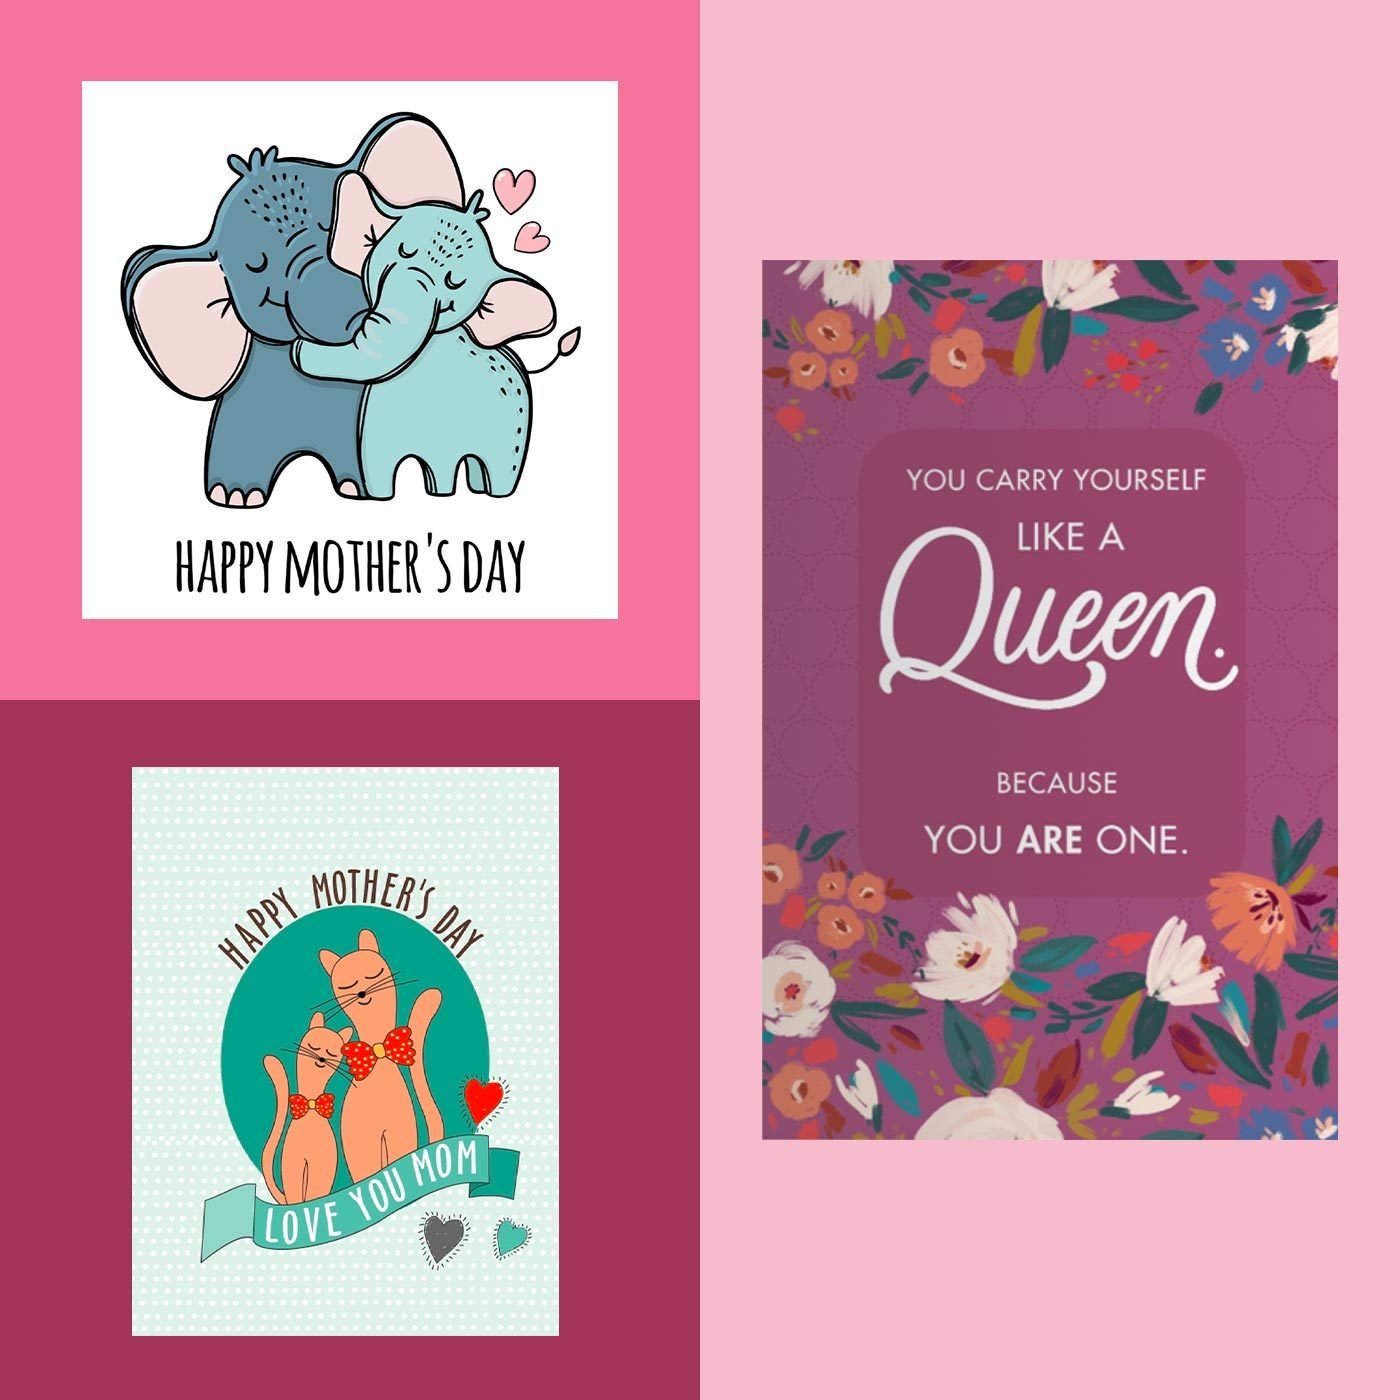 https://www.rd.com/wp-content/uploads/2022/04/45-Free-Printable-Mothers-Day-Cards-That-Send-the-Perfect-Message_FT-1.jpg?fit=700%2C700